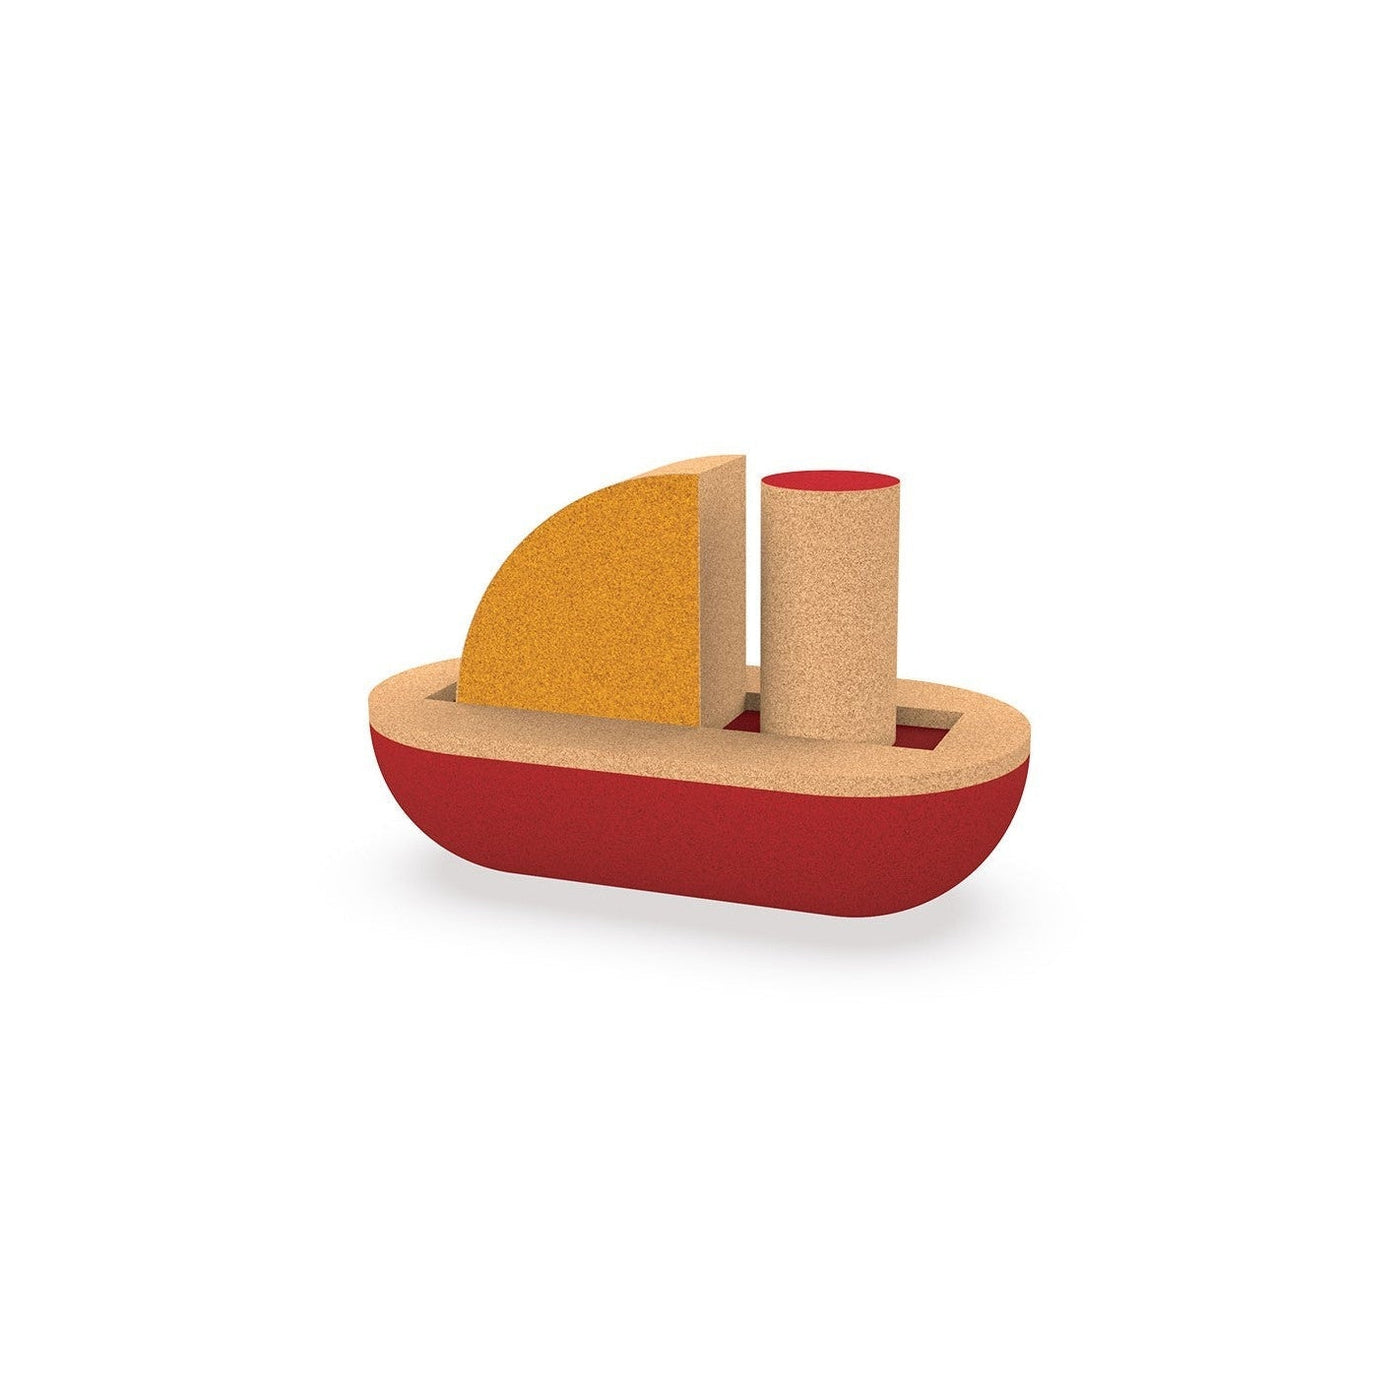 Elou Yacht Bath & Water Toy - Cork Toys Made in Portugal